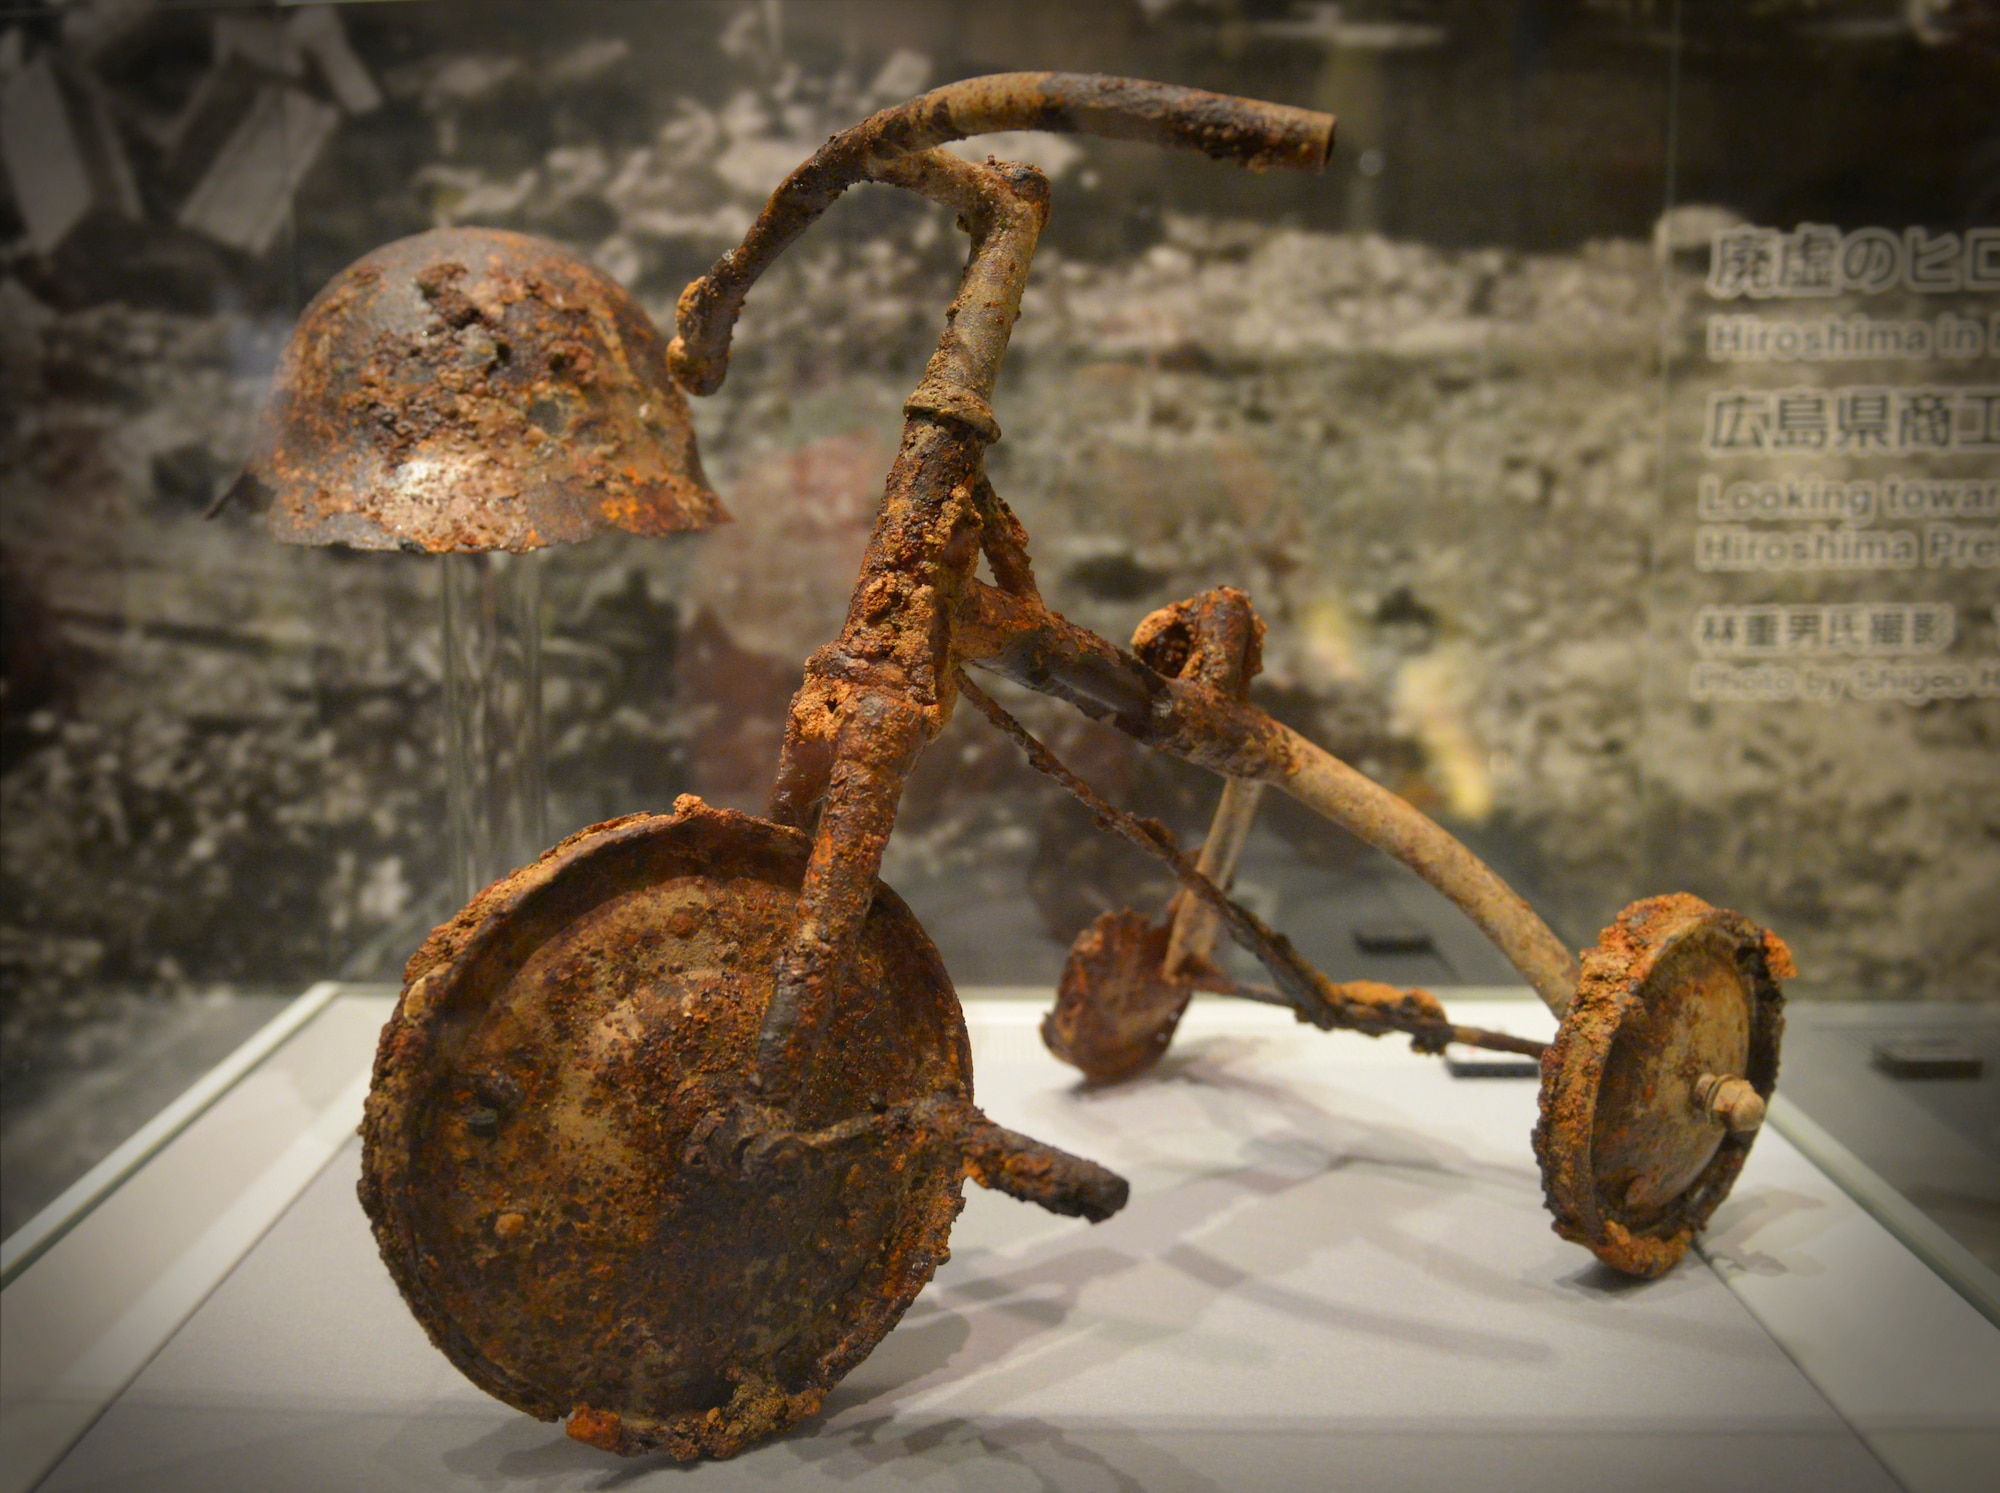 A tricycle and helmet are displayed at Hiroshima Peace Memorial Museum, Hiroshima, Japan, June 1, 2016. Artifacts are among the displays at Hiroshima Peace Memorial Museum, which contains remnants, photos and depictions to demonstrate the destruction of the bomb which the U.S. dropped on Hiroshima at the end of World War II. (U.S. Air Force photo by Airman 1st Class Elizabeth Baker/Released)